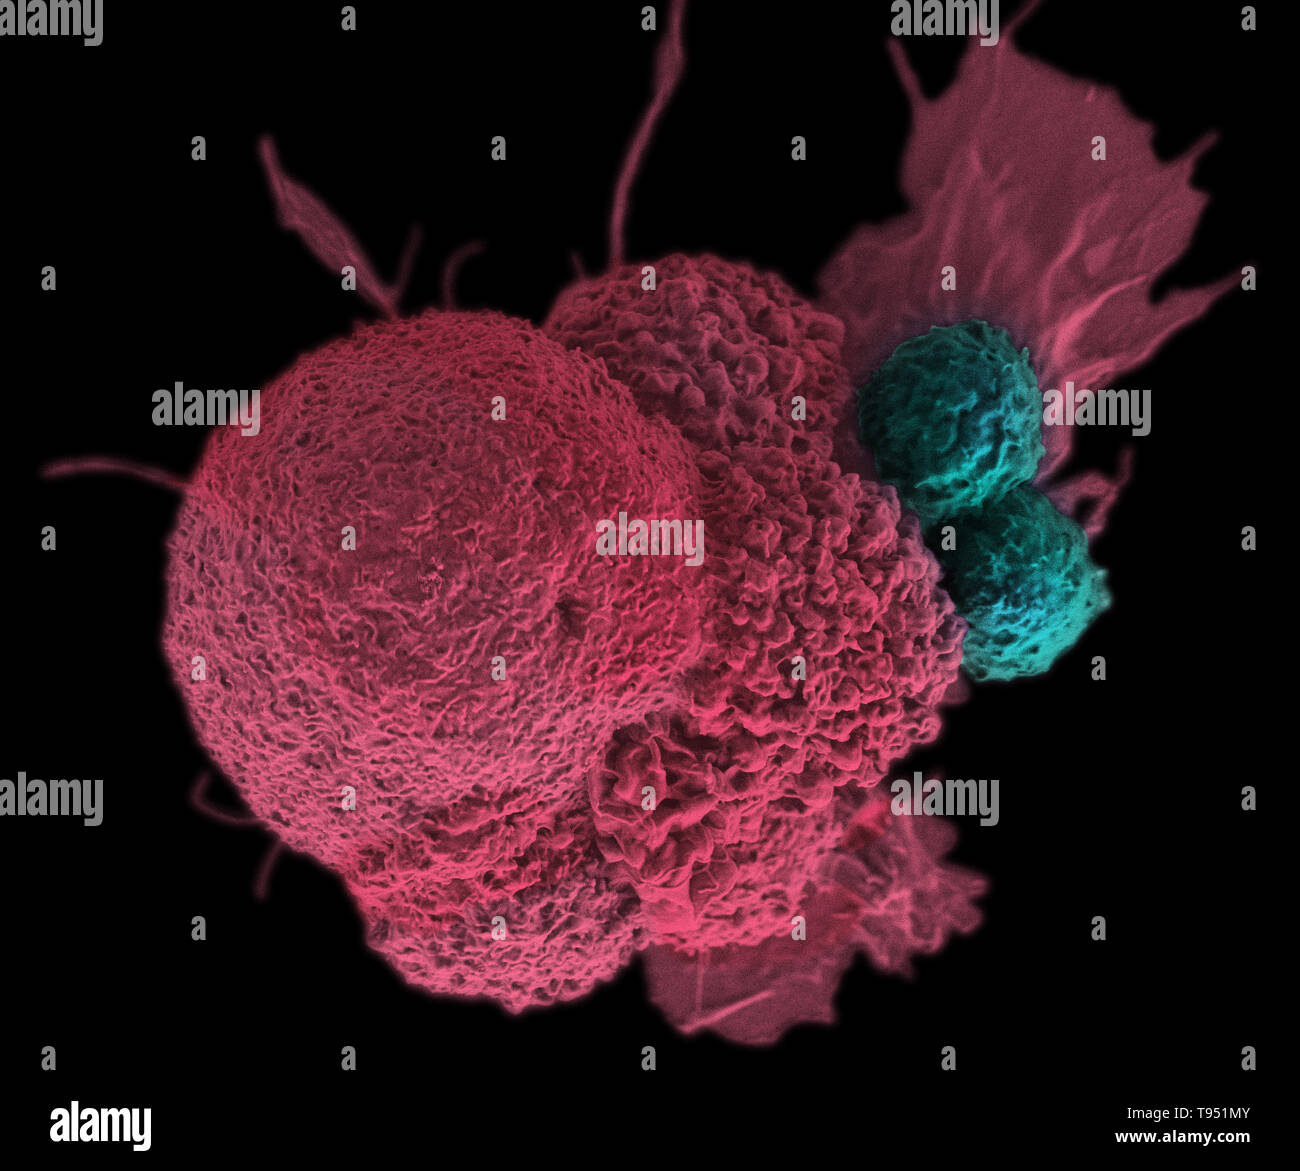 This electron micrograph (SEM) shows an oral squamous cancer cell (red) being attacked by two cytotoxic T cells (blue). The tumor-specific T cells were developed from the patient's own immune system, a personalized cancer vaccine like those that may be developed in the future with the help of NIST's standardized human genomes. This image has been colorized. Stock Photo